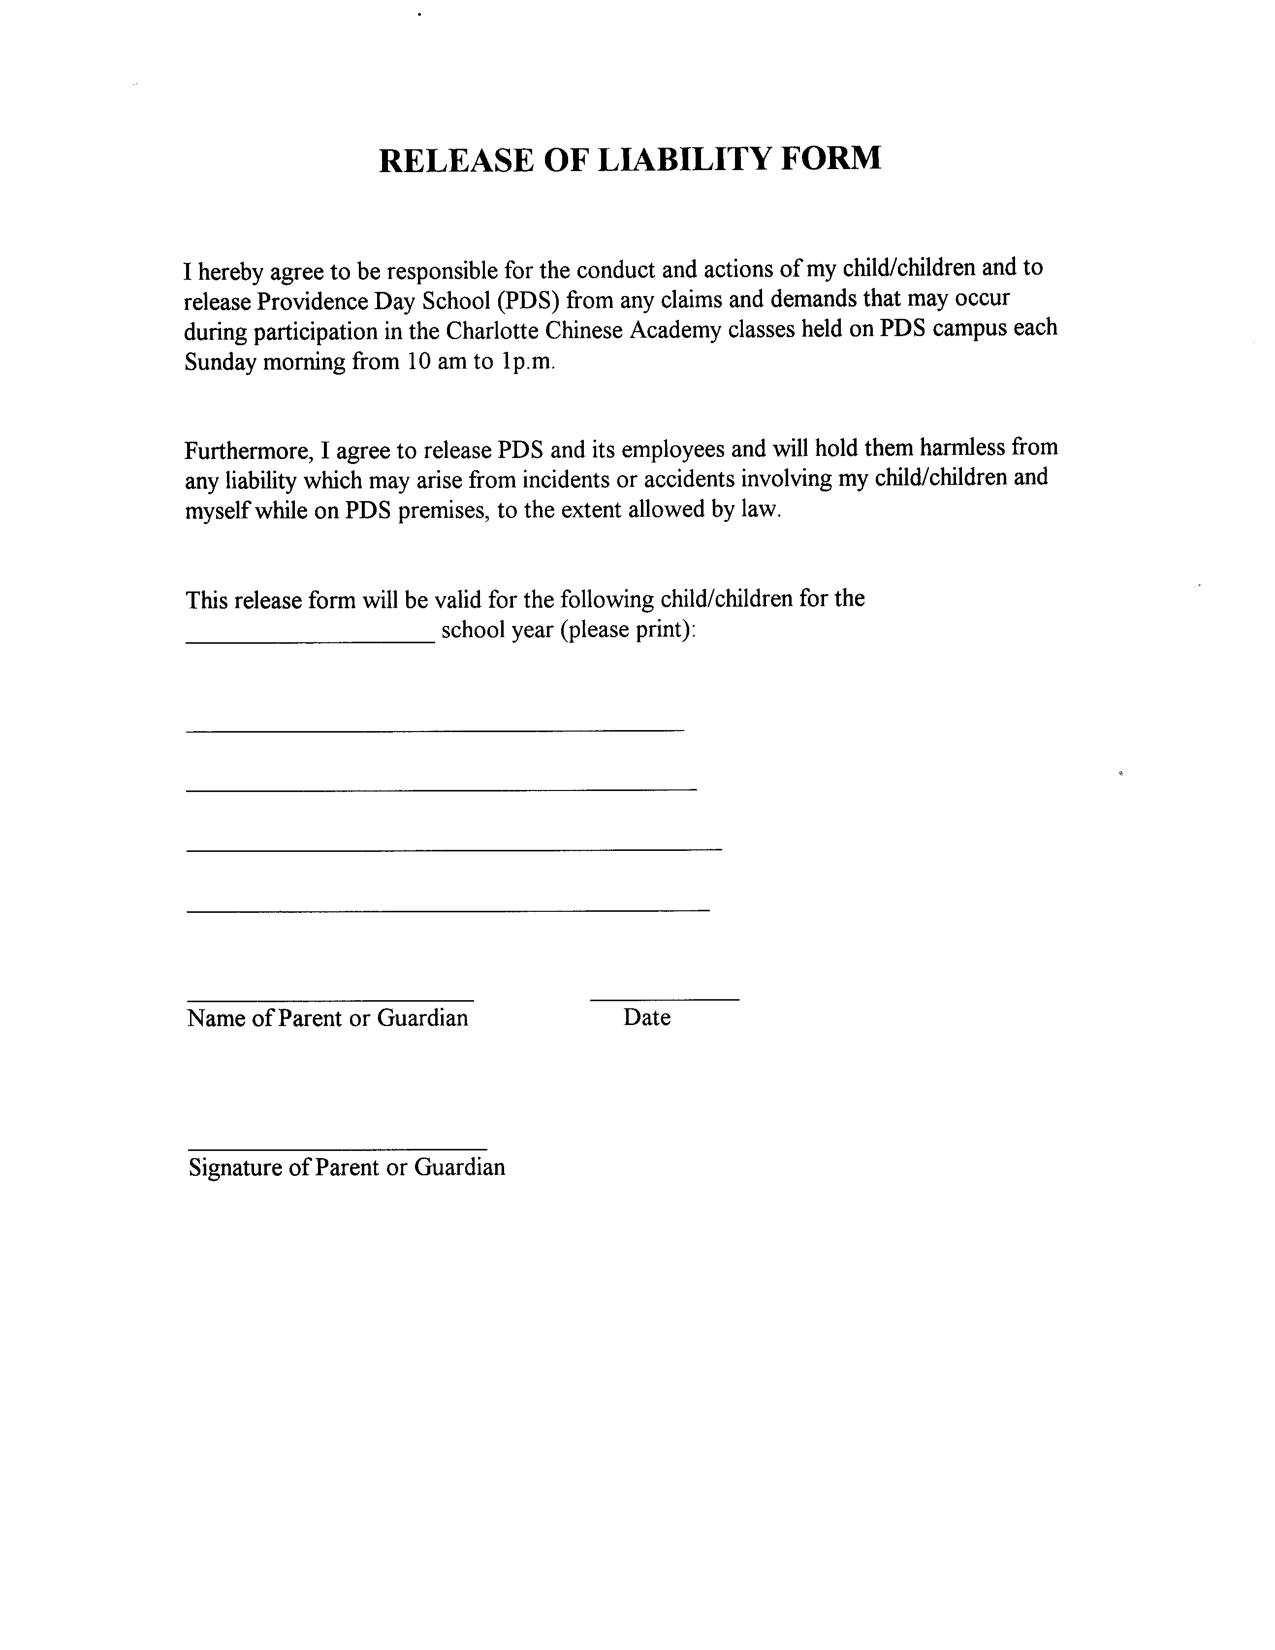 Liability Release Form Template In Images - Release Of Liability - Free Printable Print Release Form